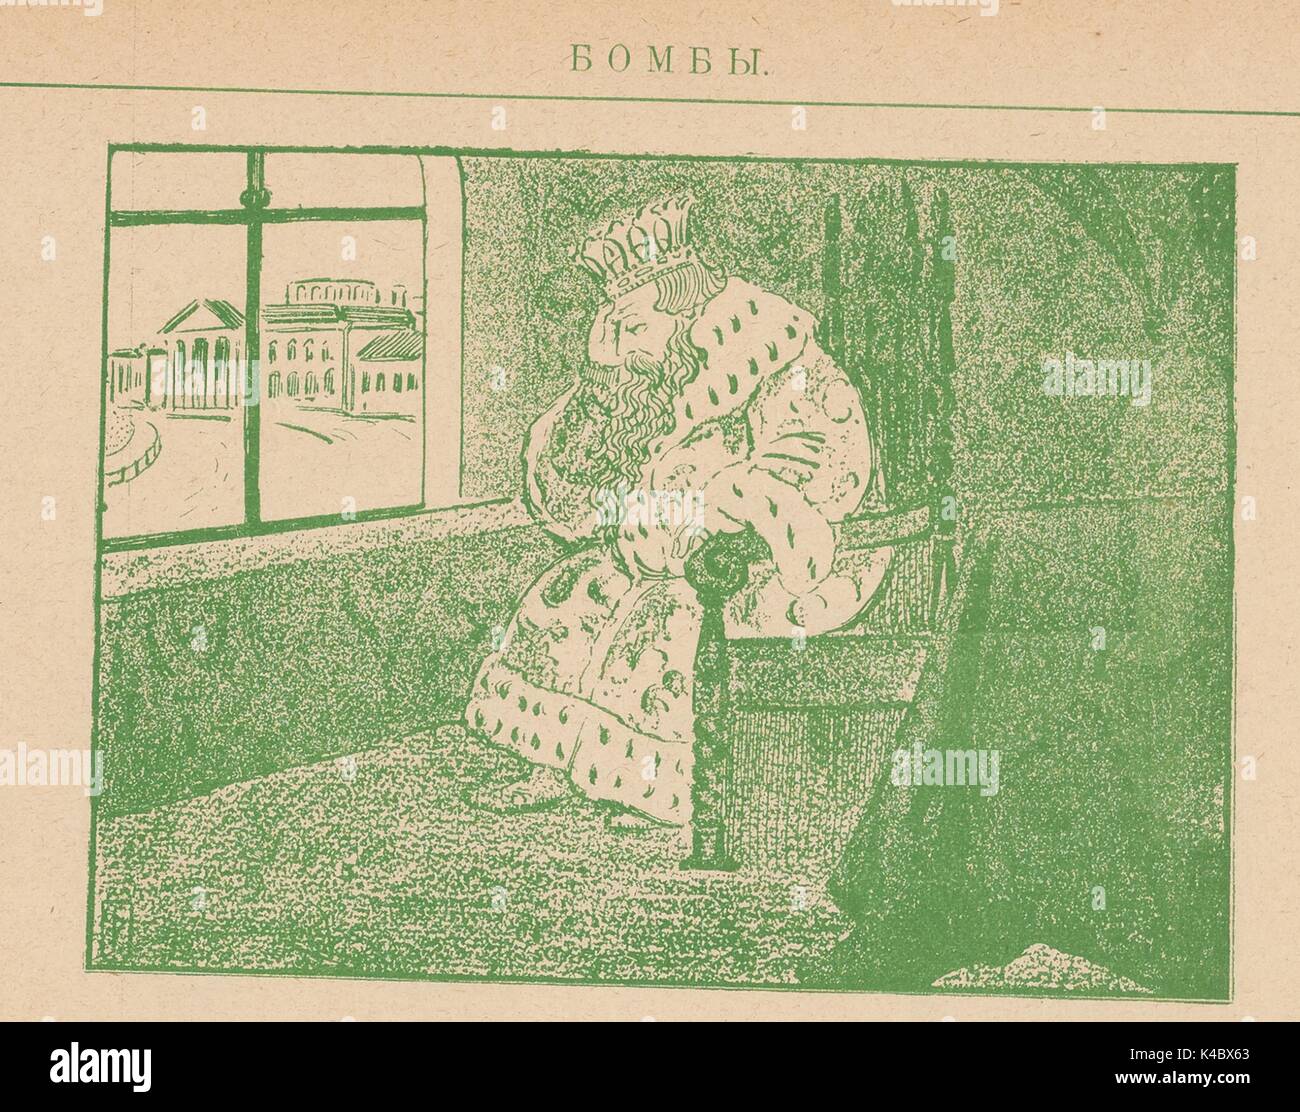 Cartoon of a king looking sad, sitting on a throne in a dark room and holding his head in his hand, with a civic building visible through the window of the room, from the Russian satirical journal Bomby, 1905. Stock Photo